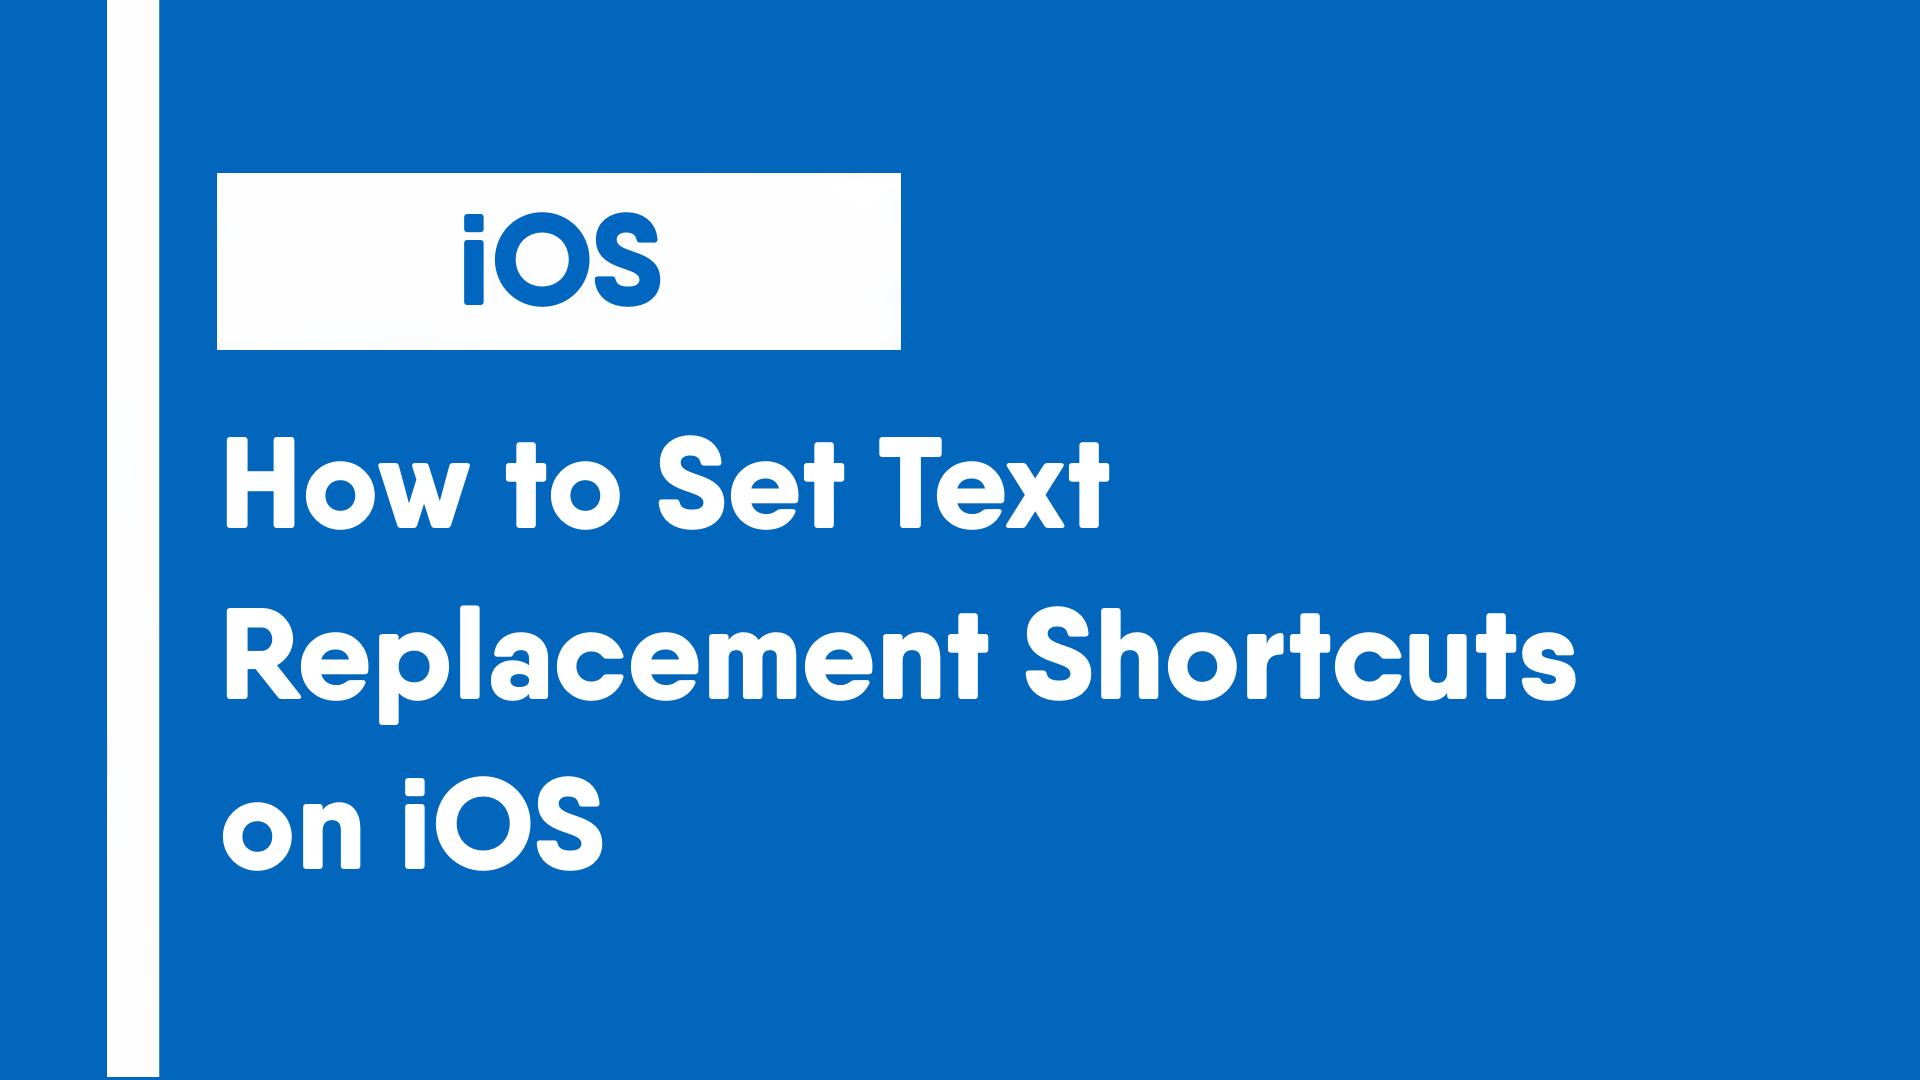 How to Set Text Replacement Shortcuts on iOS